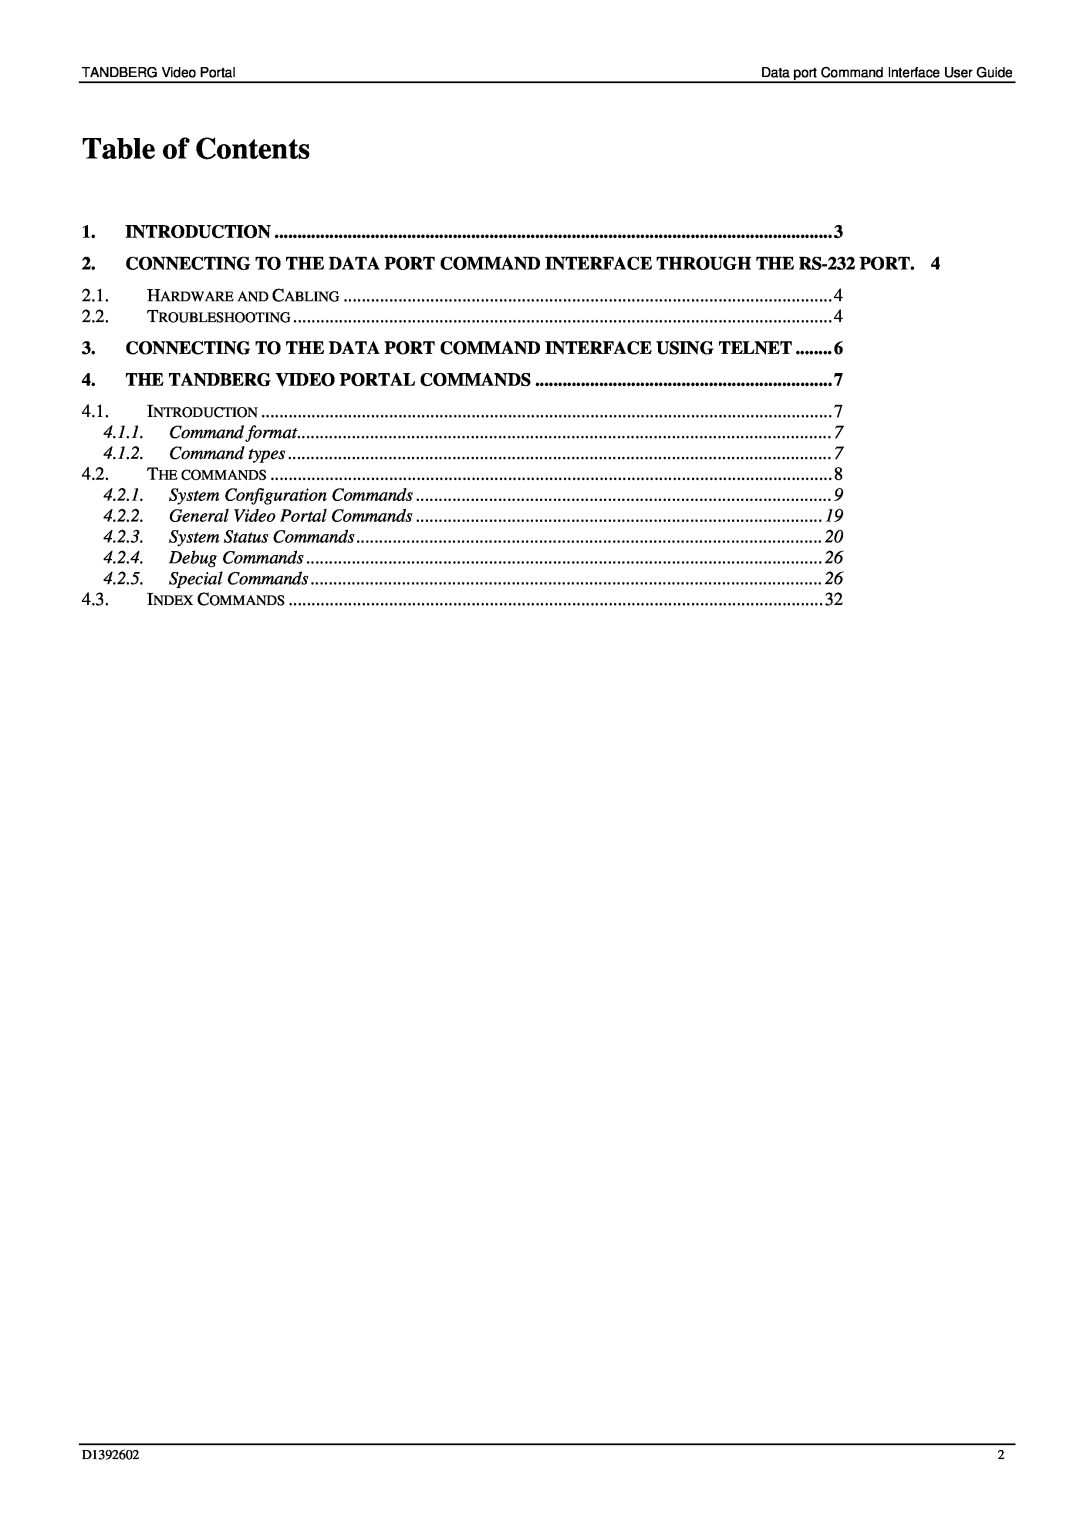 TANDBERG D1392602 manual Table of Contents, Introduction, Connecting To The Data Port Command Interface Using Telnet, 4.1.1 